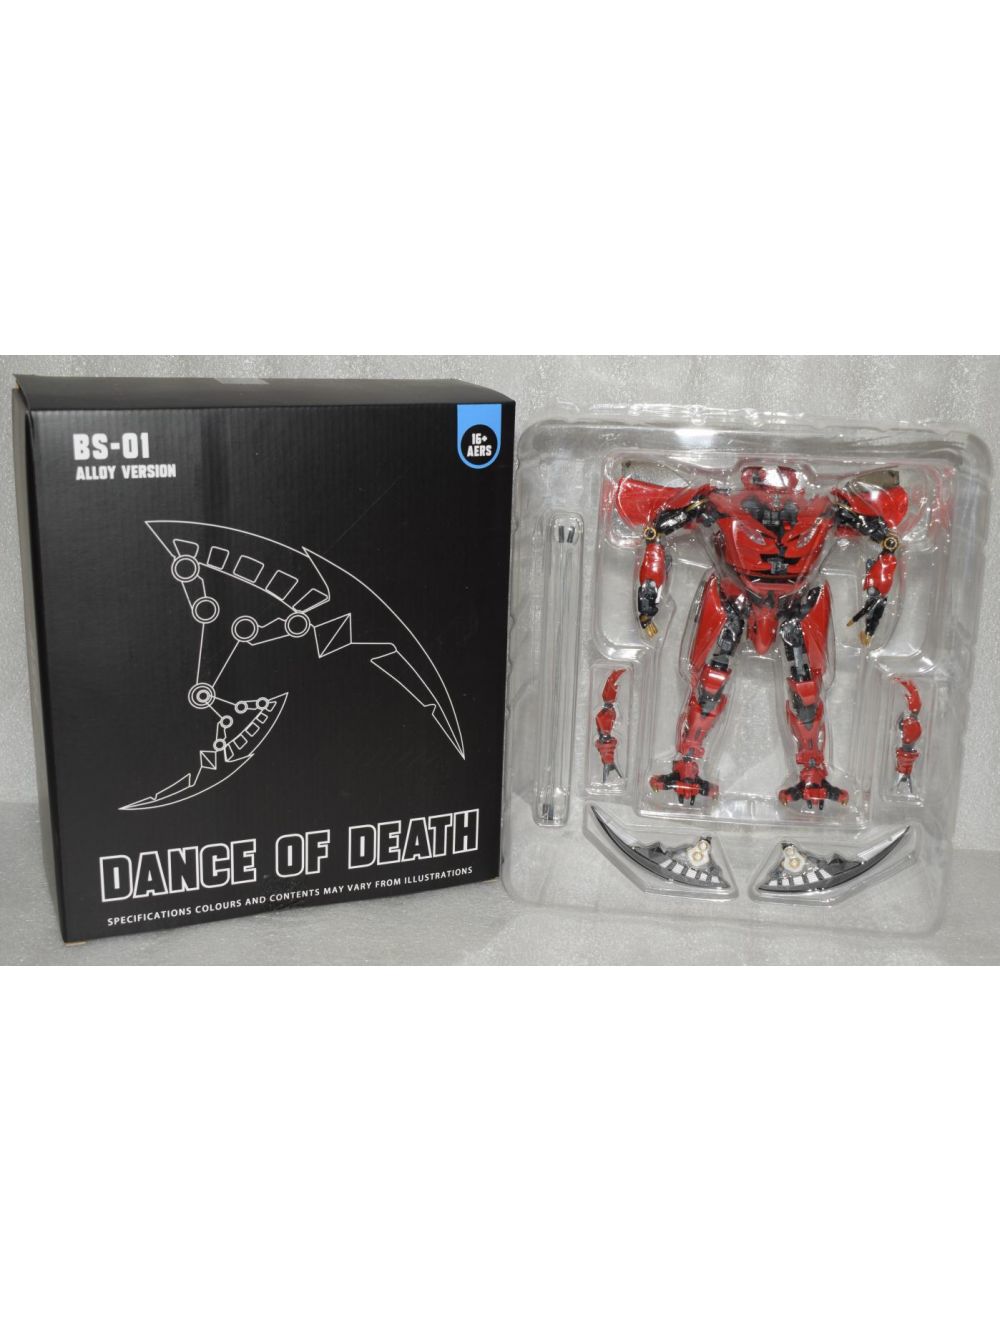 Transformation Dance of Death BS-01 Alloy Version Dino,in stock